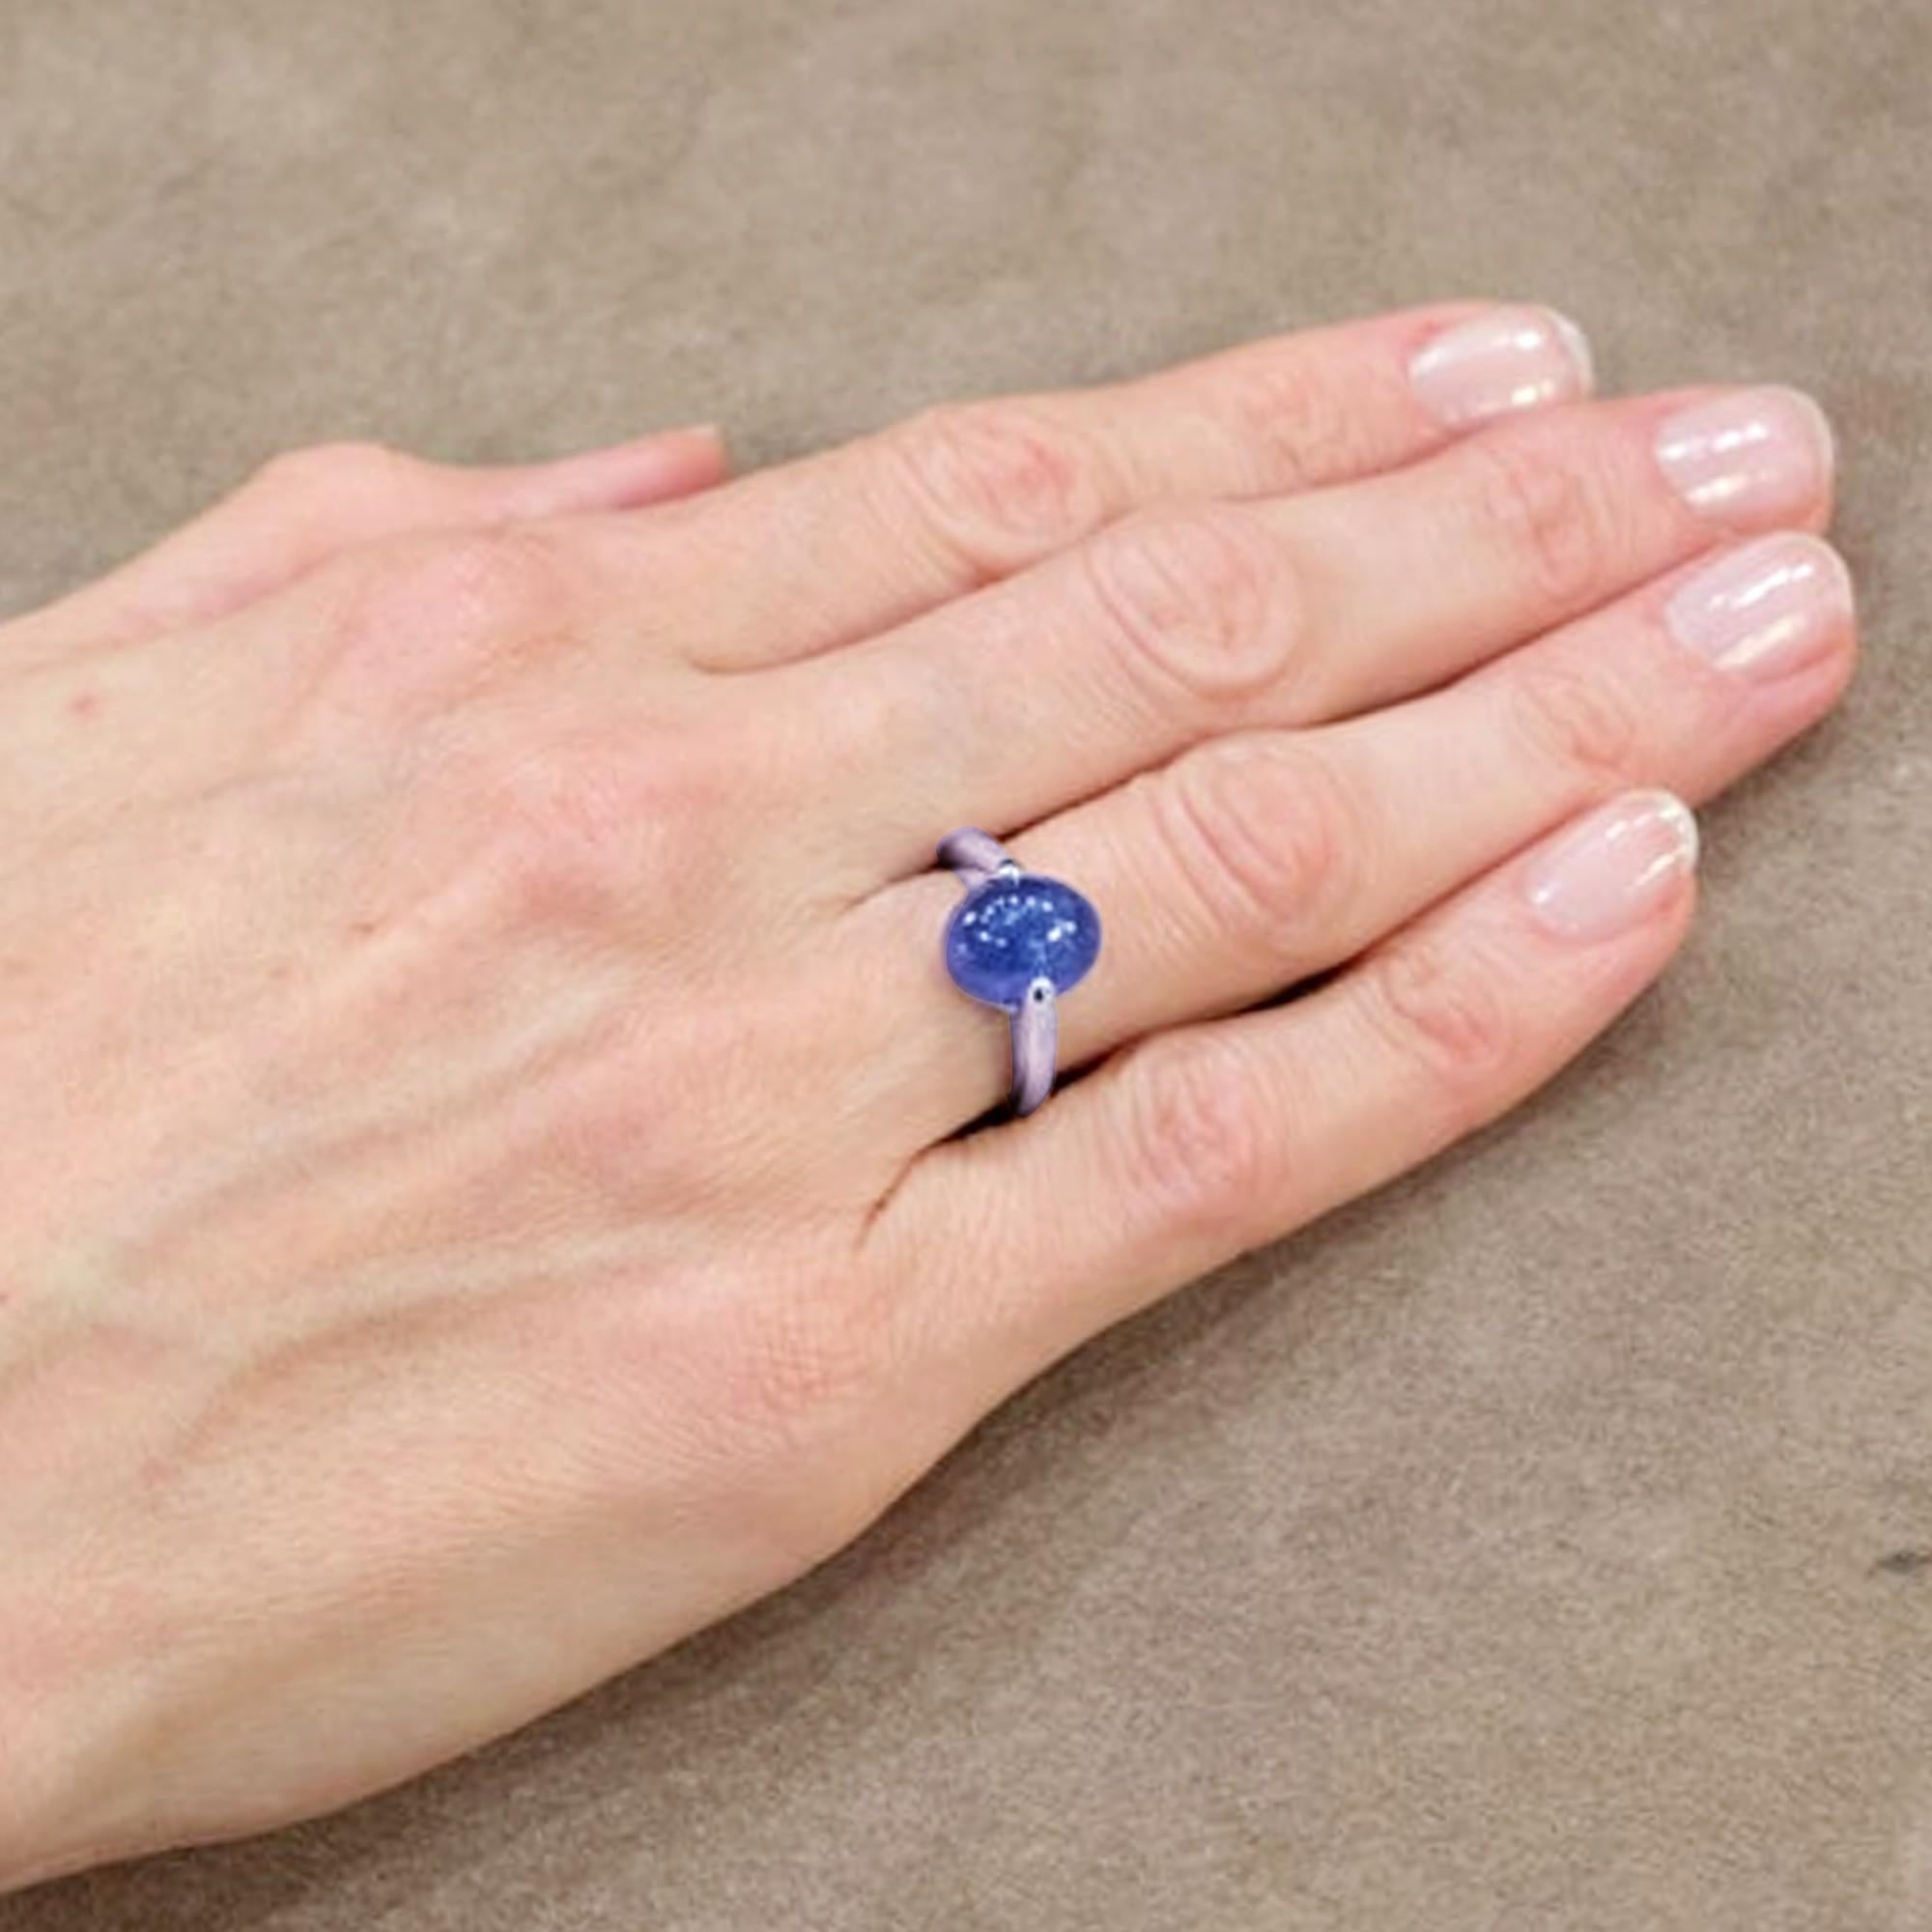 Alex Jona design collection, hand crafted in Italy, 18 karat white gold ring centering a cabochon cut intense blue Tanzanite weighing 5.4 carats. Ring US size 6/ EU size 12 (can be sized to any specification).
Dimensions: 0.96 in. H x 0.92 in. W x